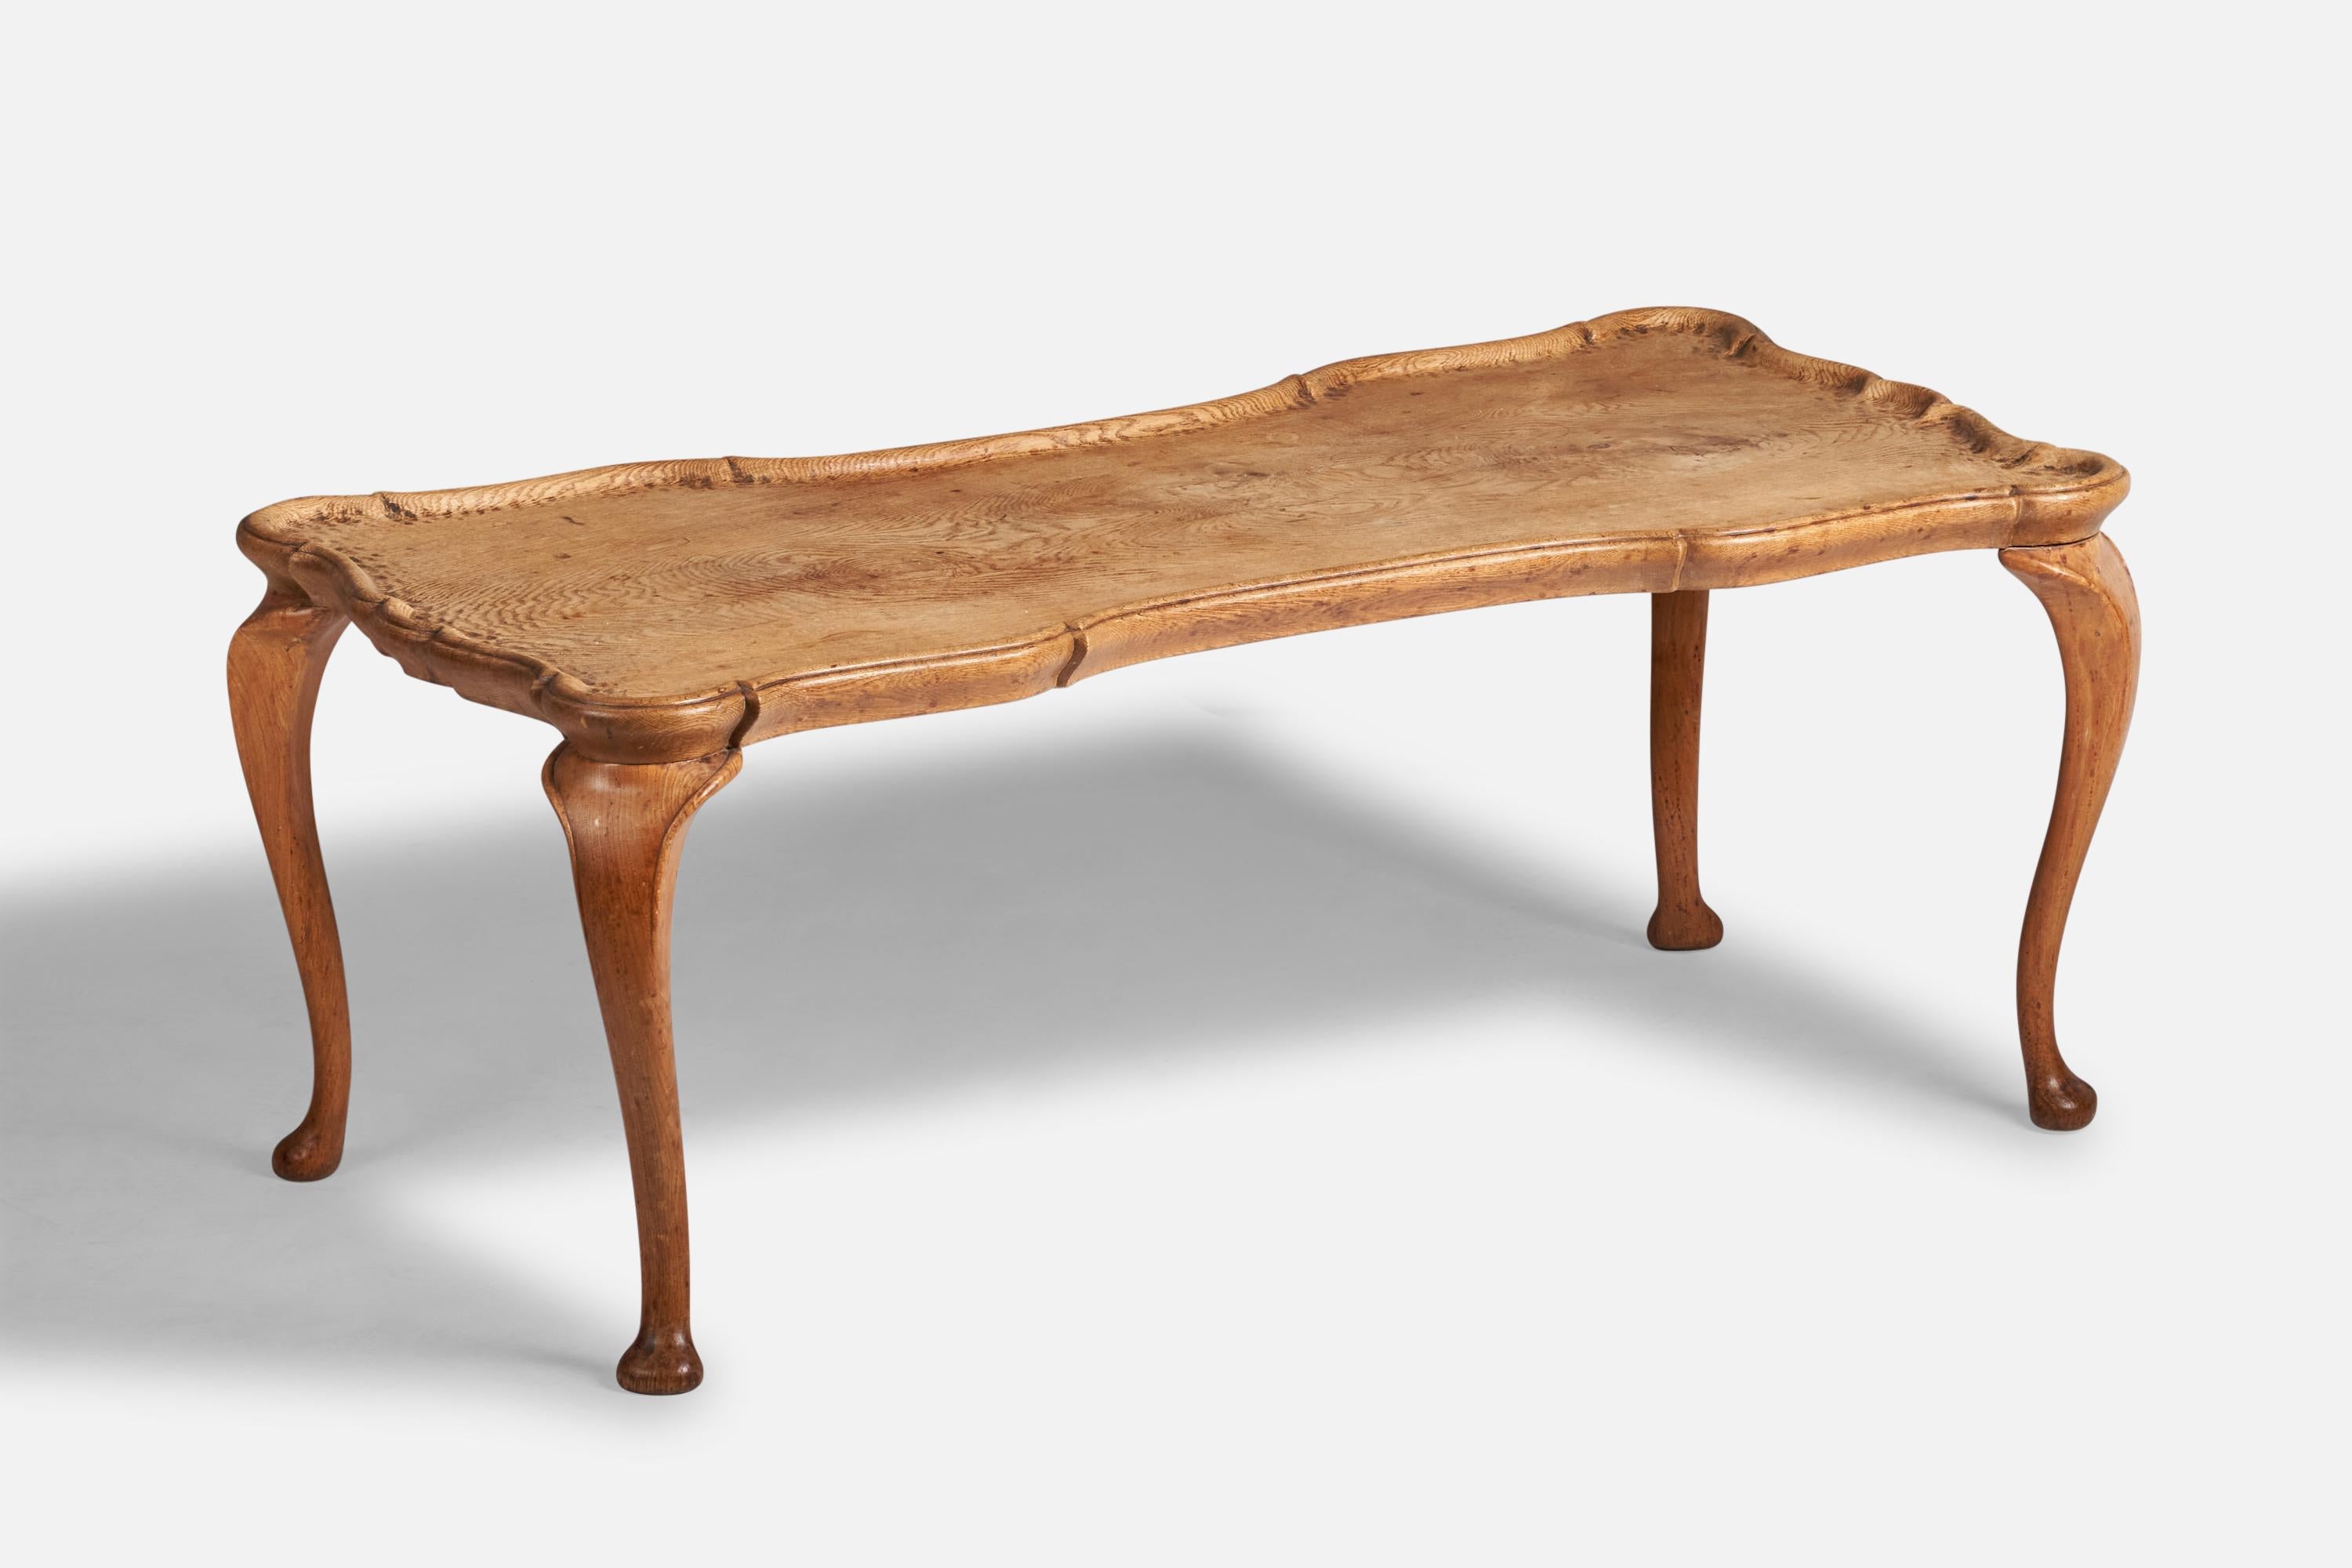 A carved oak coffee or cocktail table designed and produced in Denmark, c. 1930s.